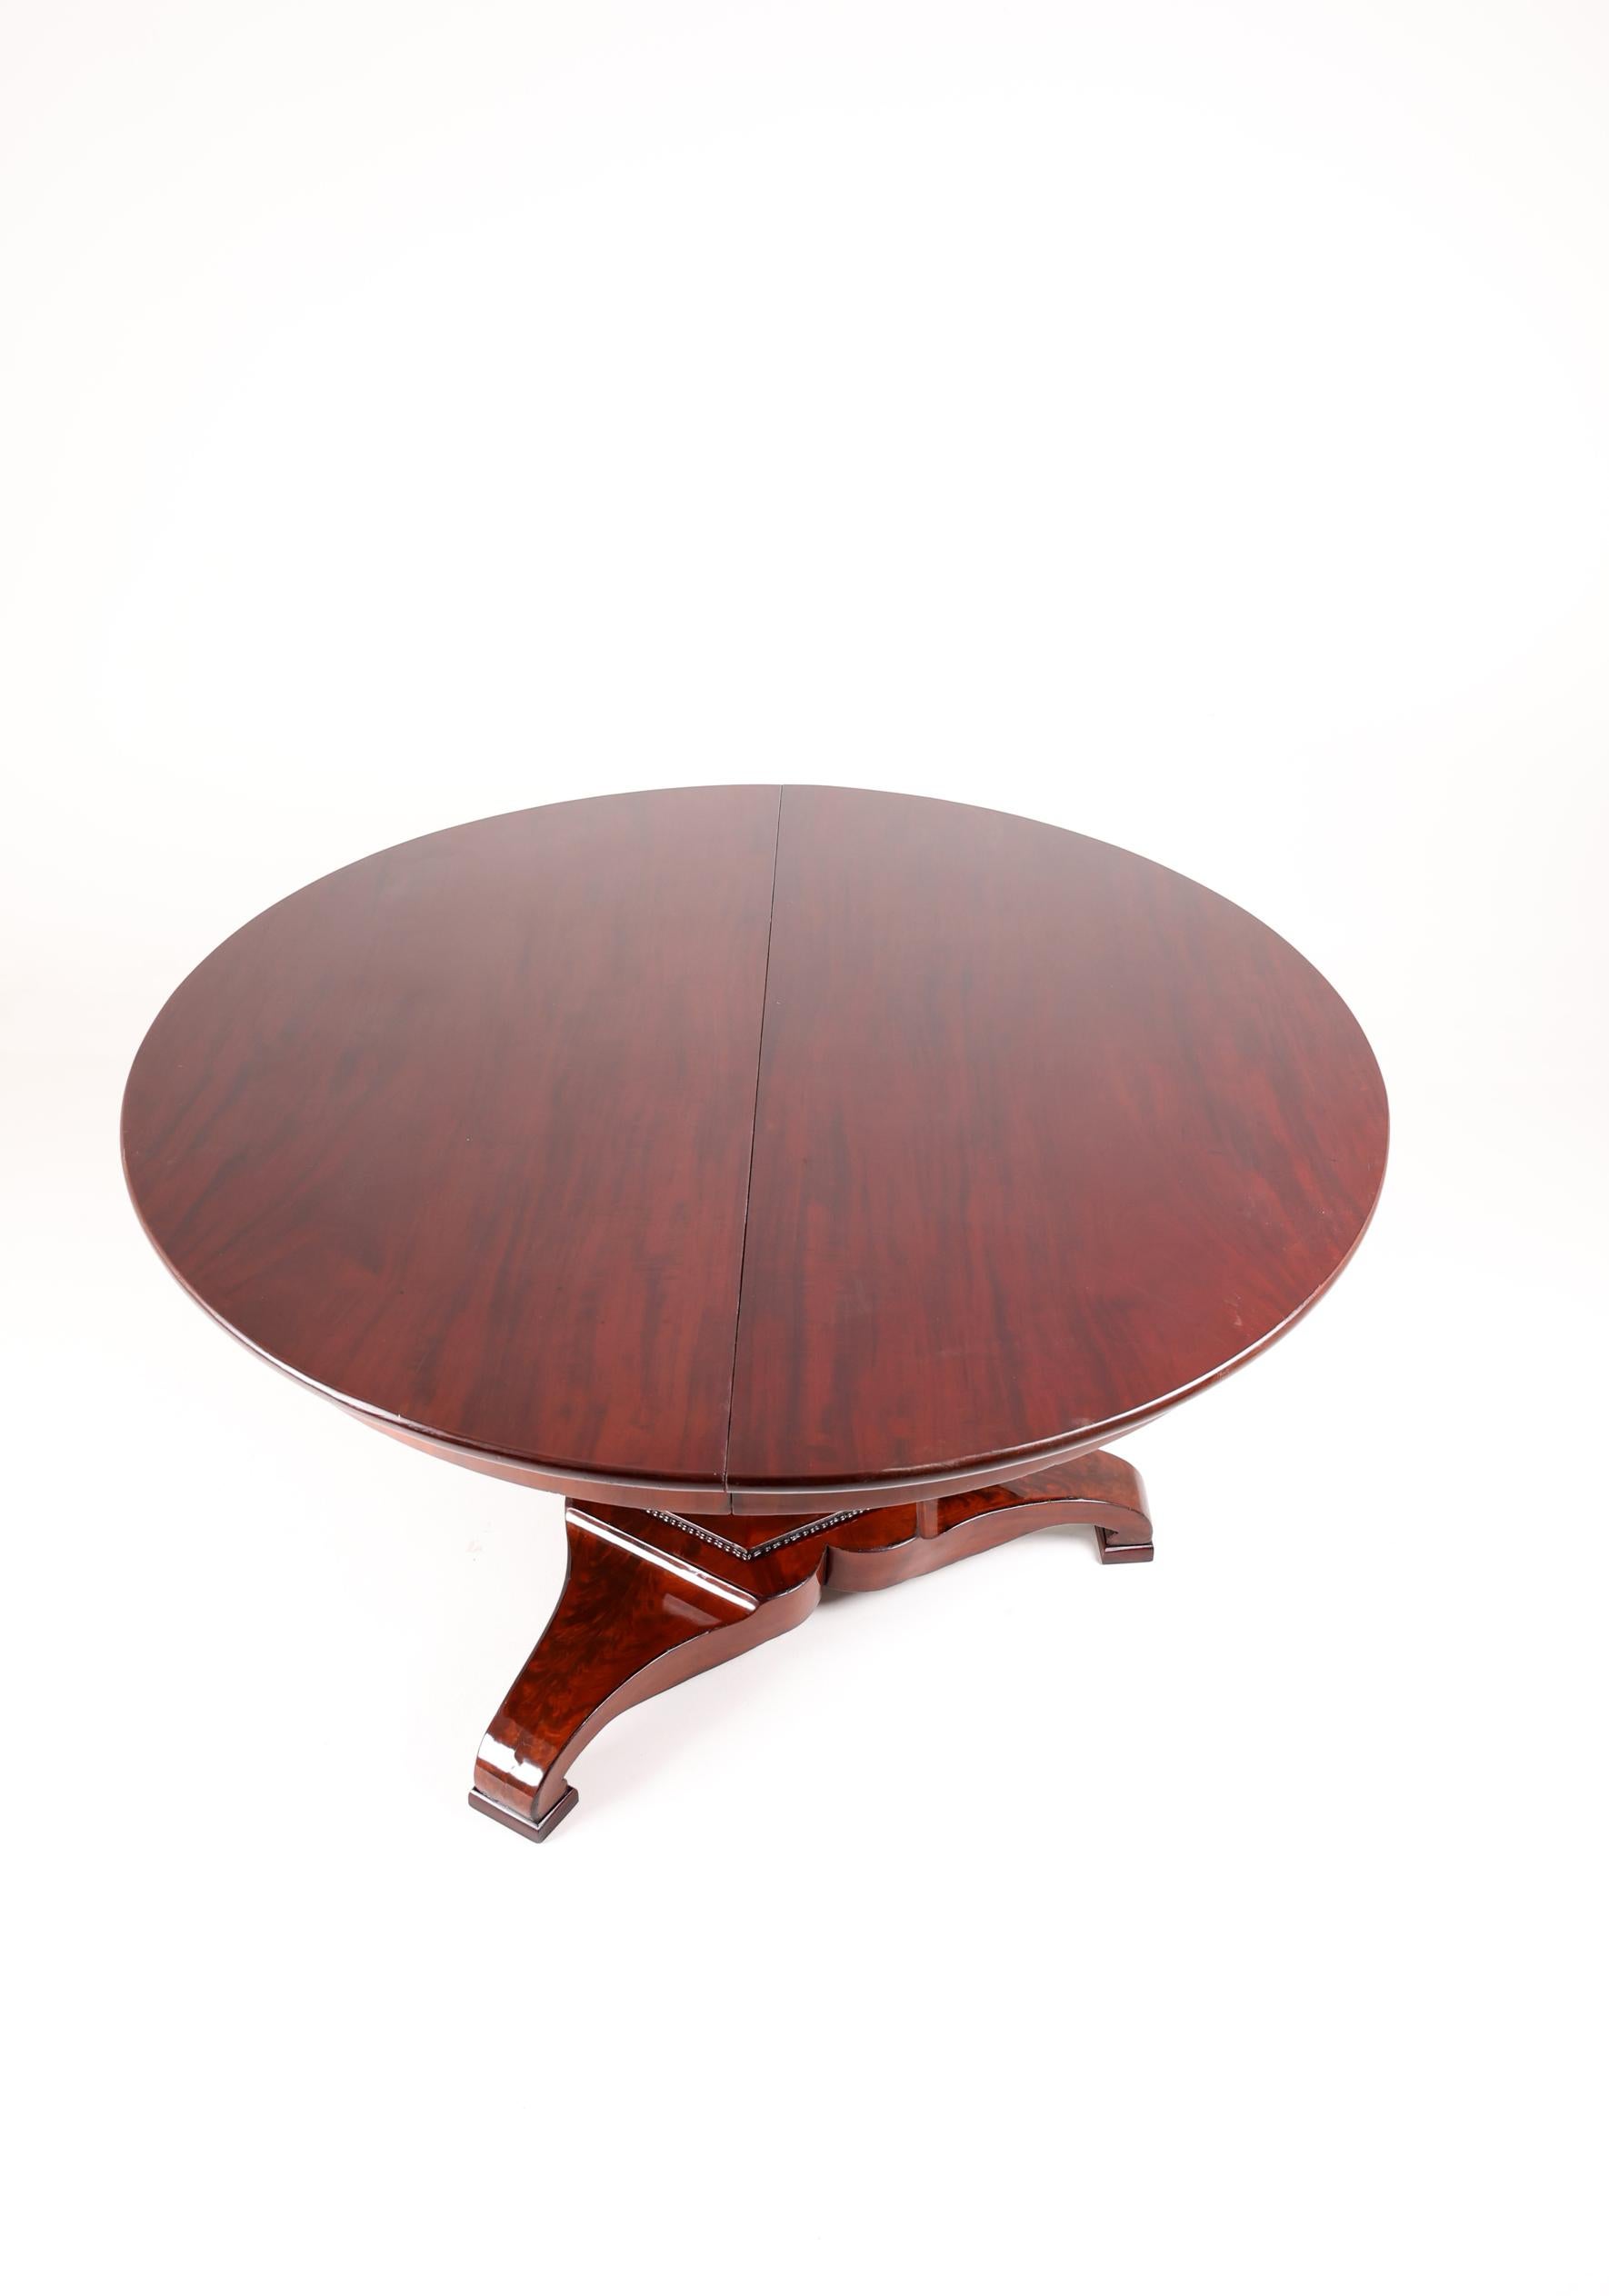 19th Century Mahogany Dining Room Table, 177 inches Long For Sale 7